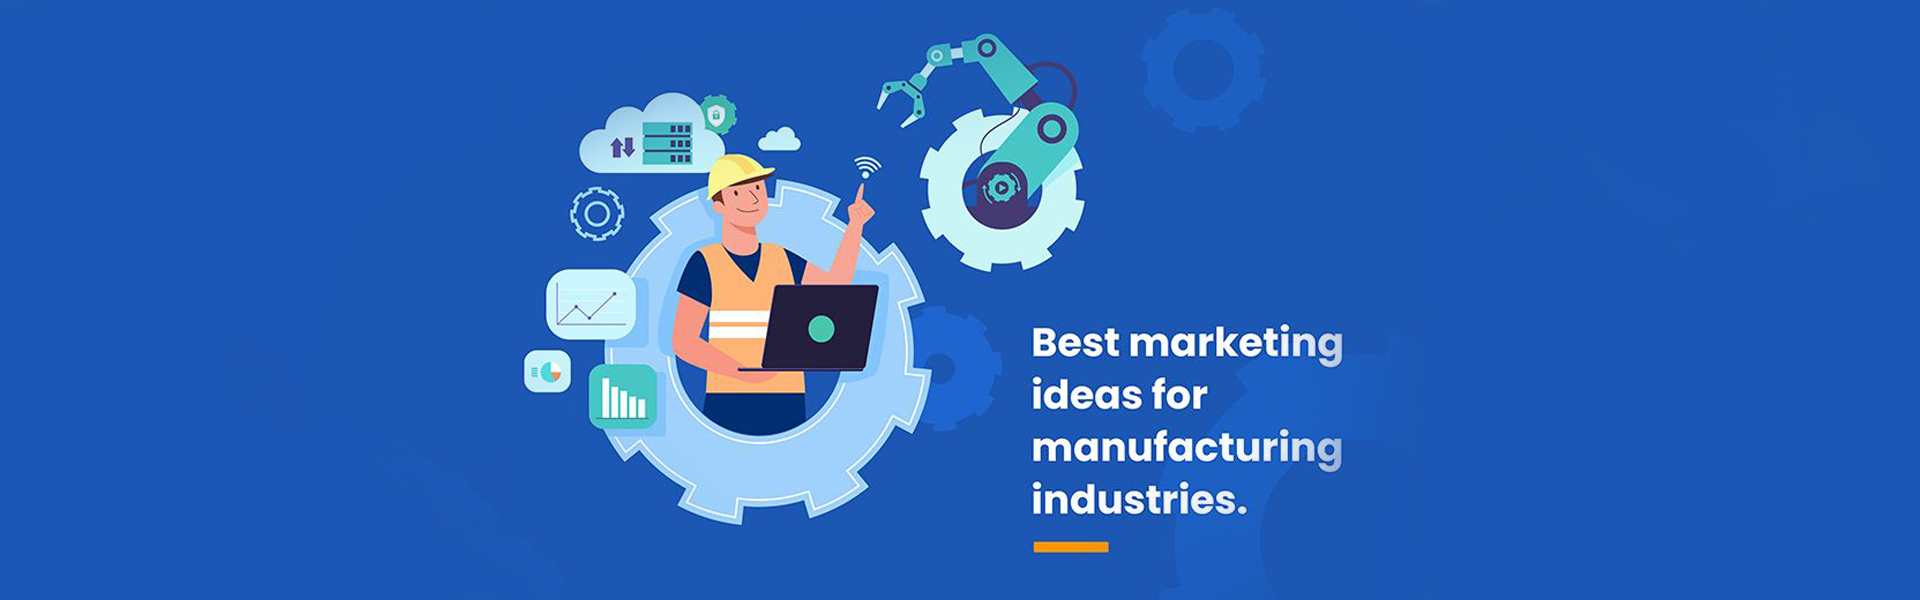 marketing ideas for manufacturing industries